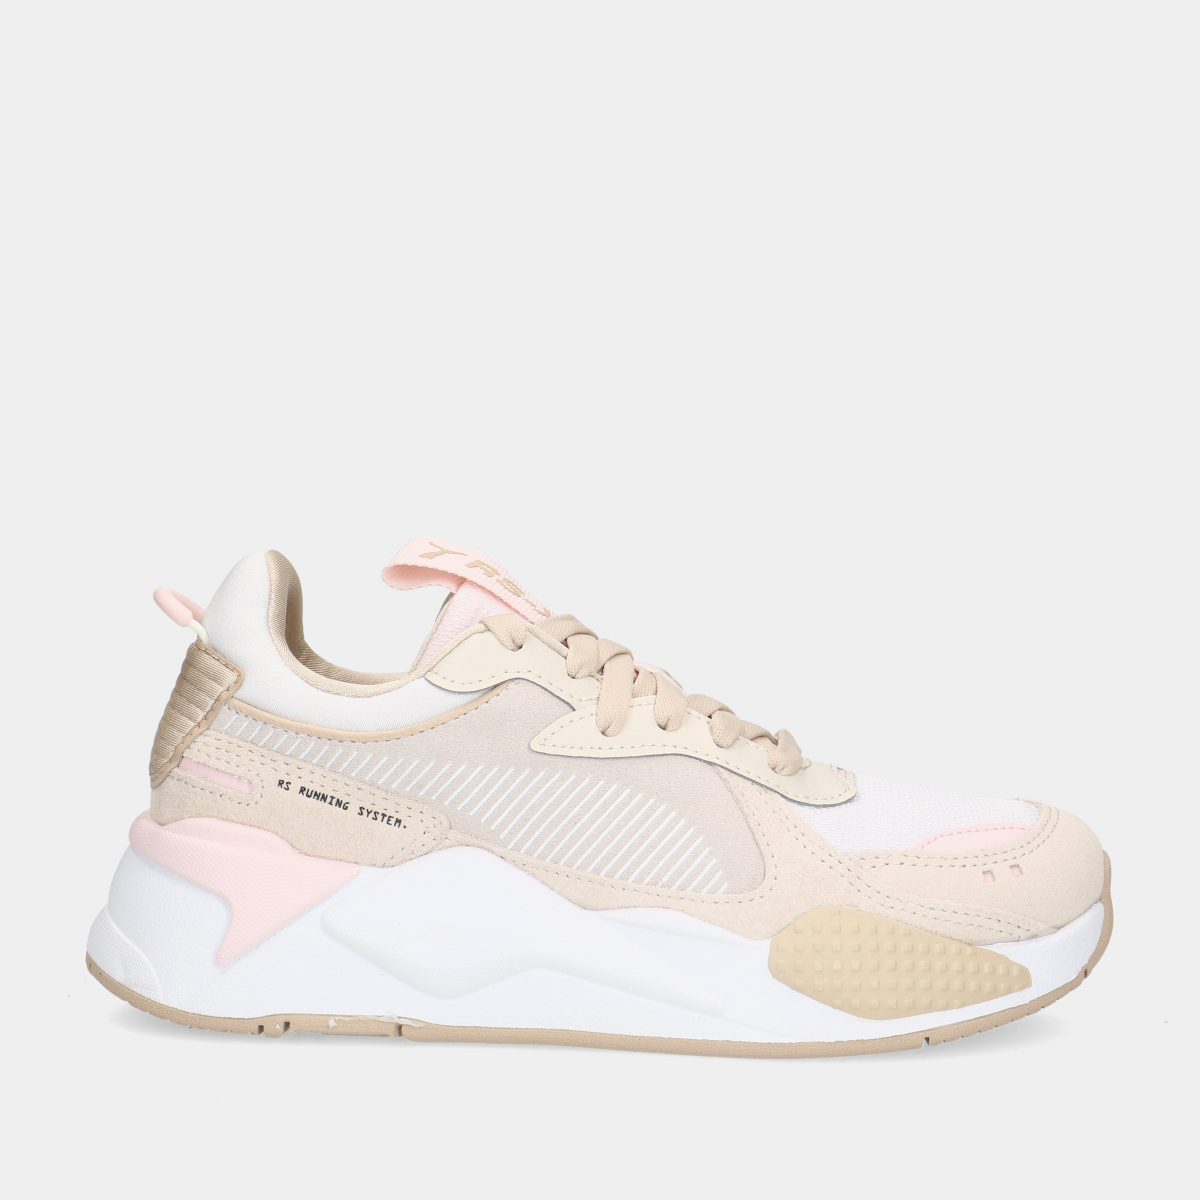 Puma RS-X Reinvent Frosty Pink/ Puma White dames sneakers